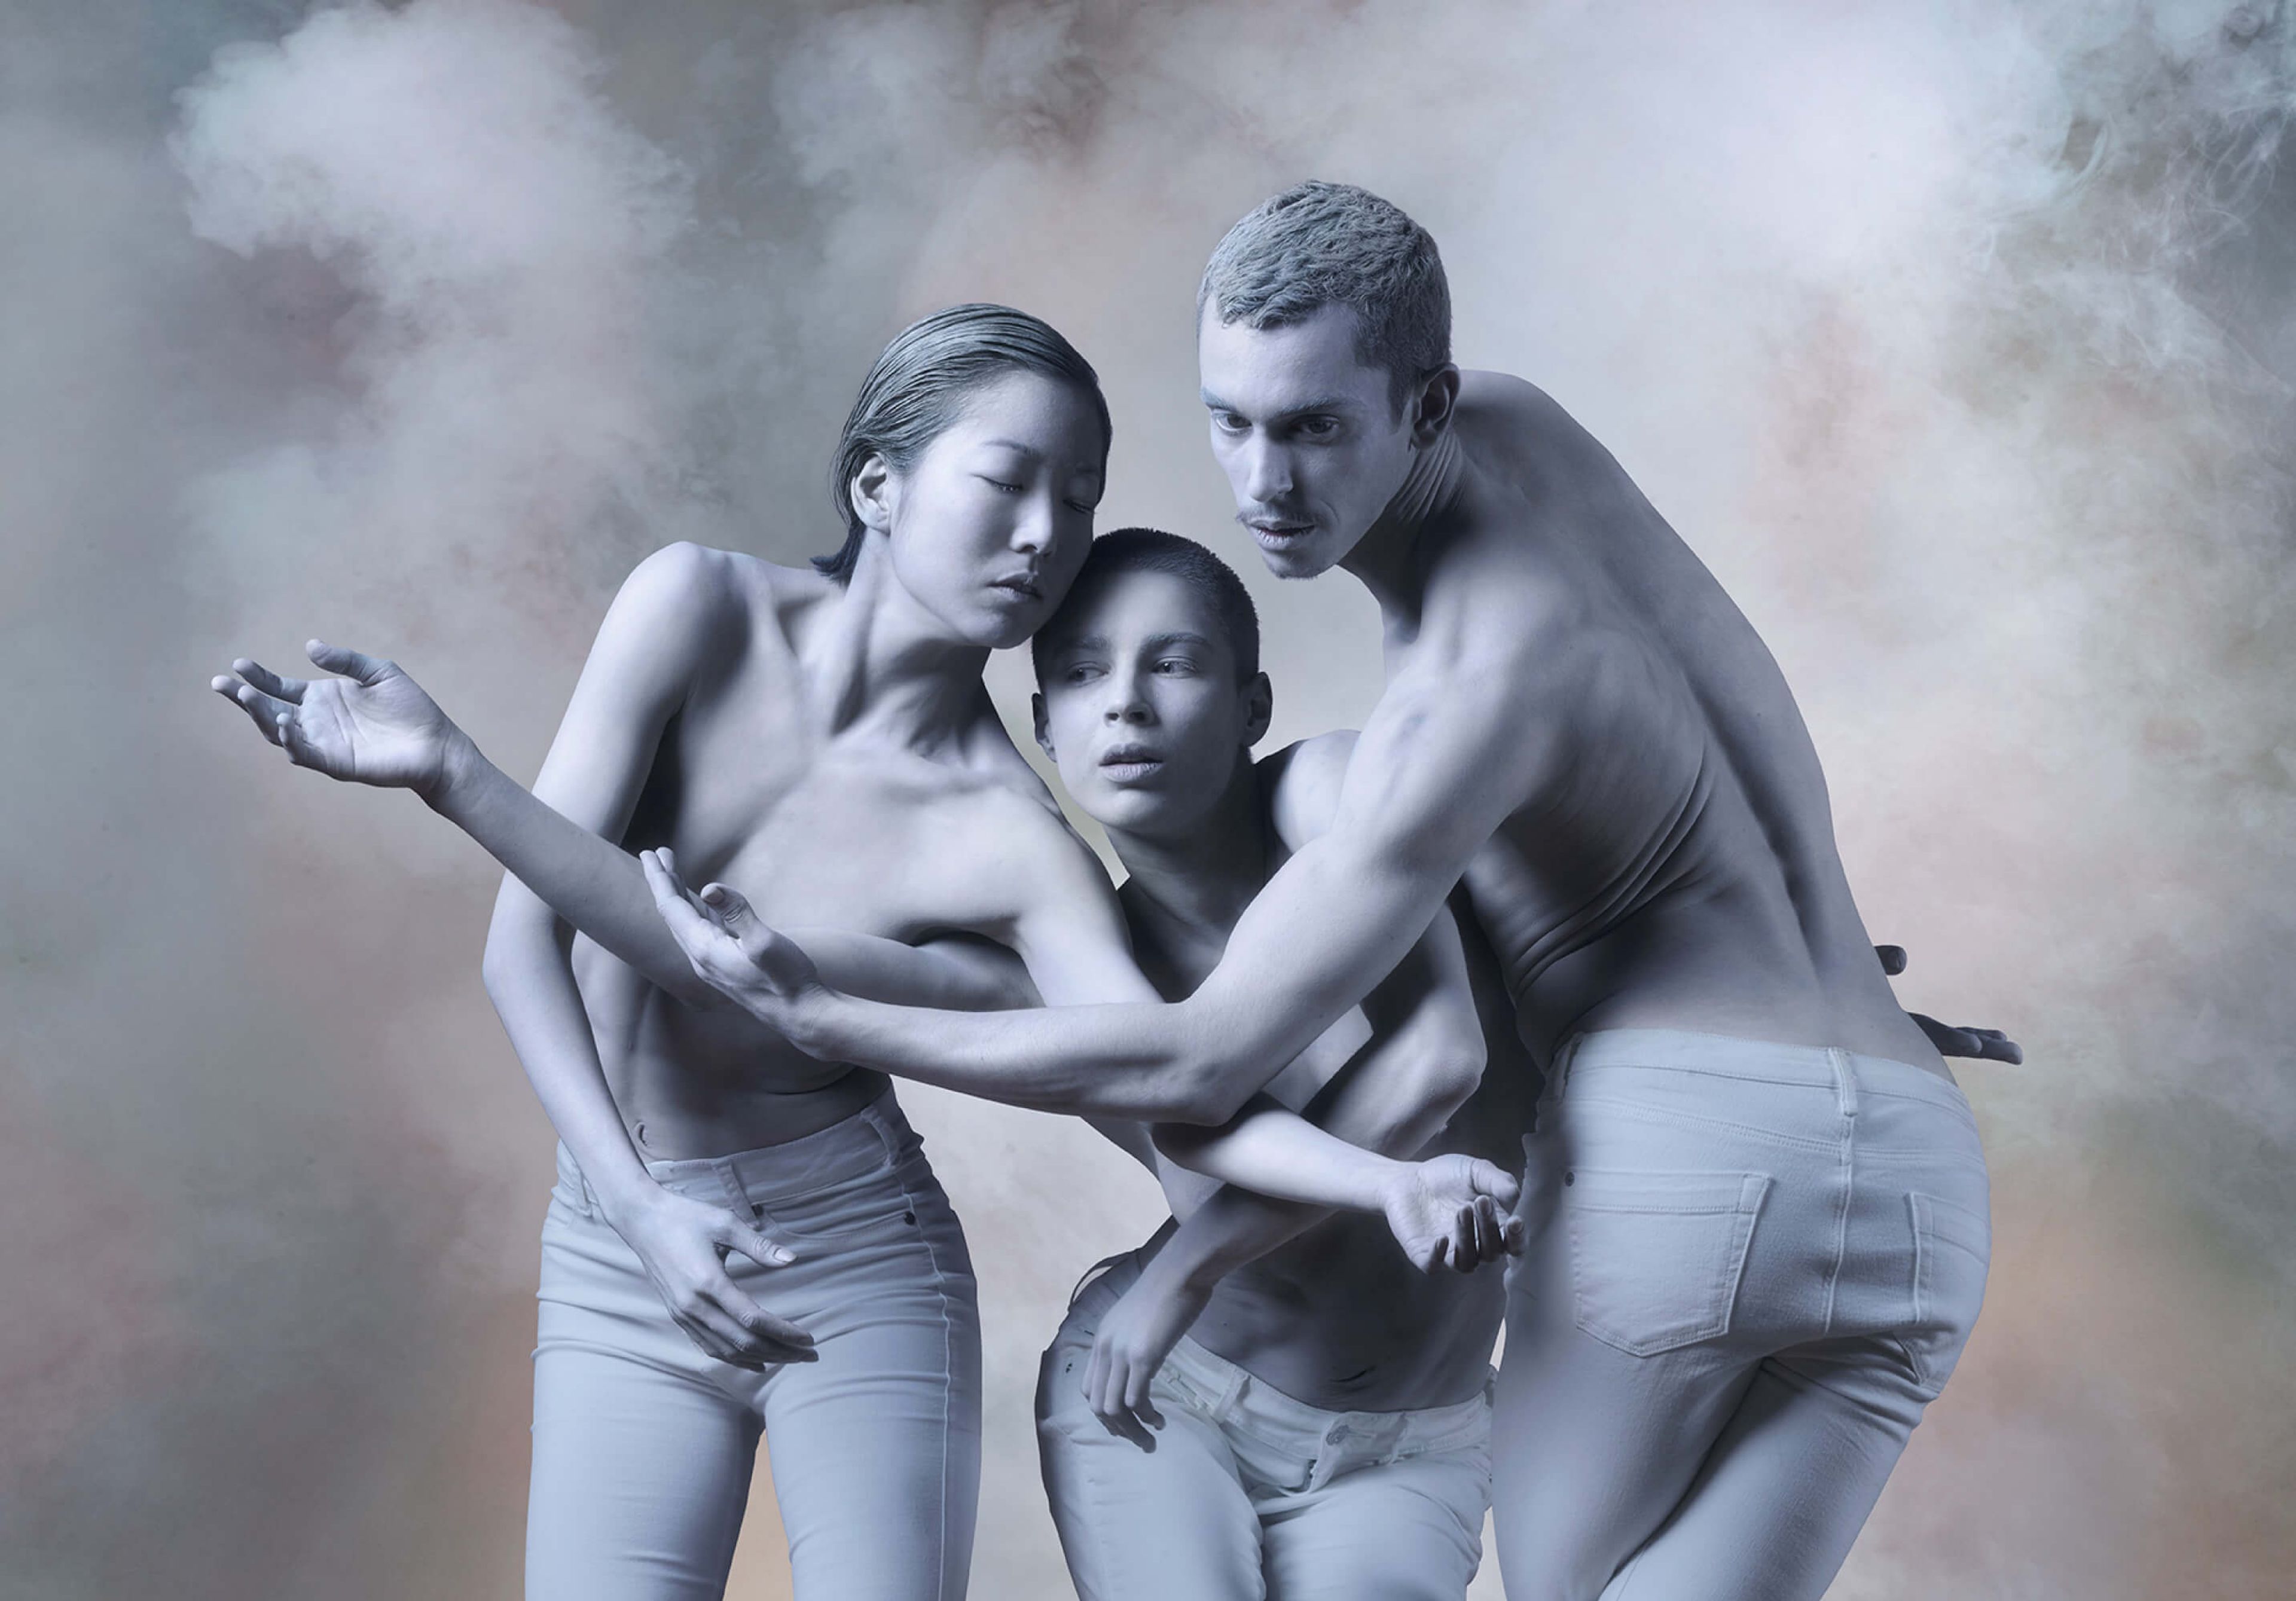 An illustrative photo from a show production, showing three people painted white, intertwined as if dancing.